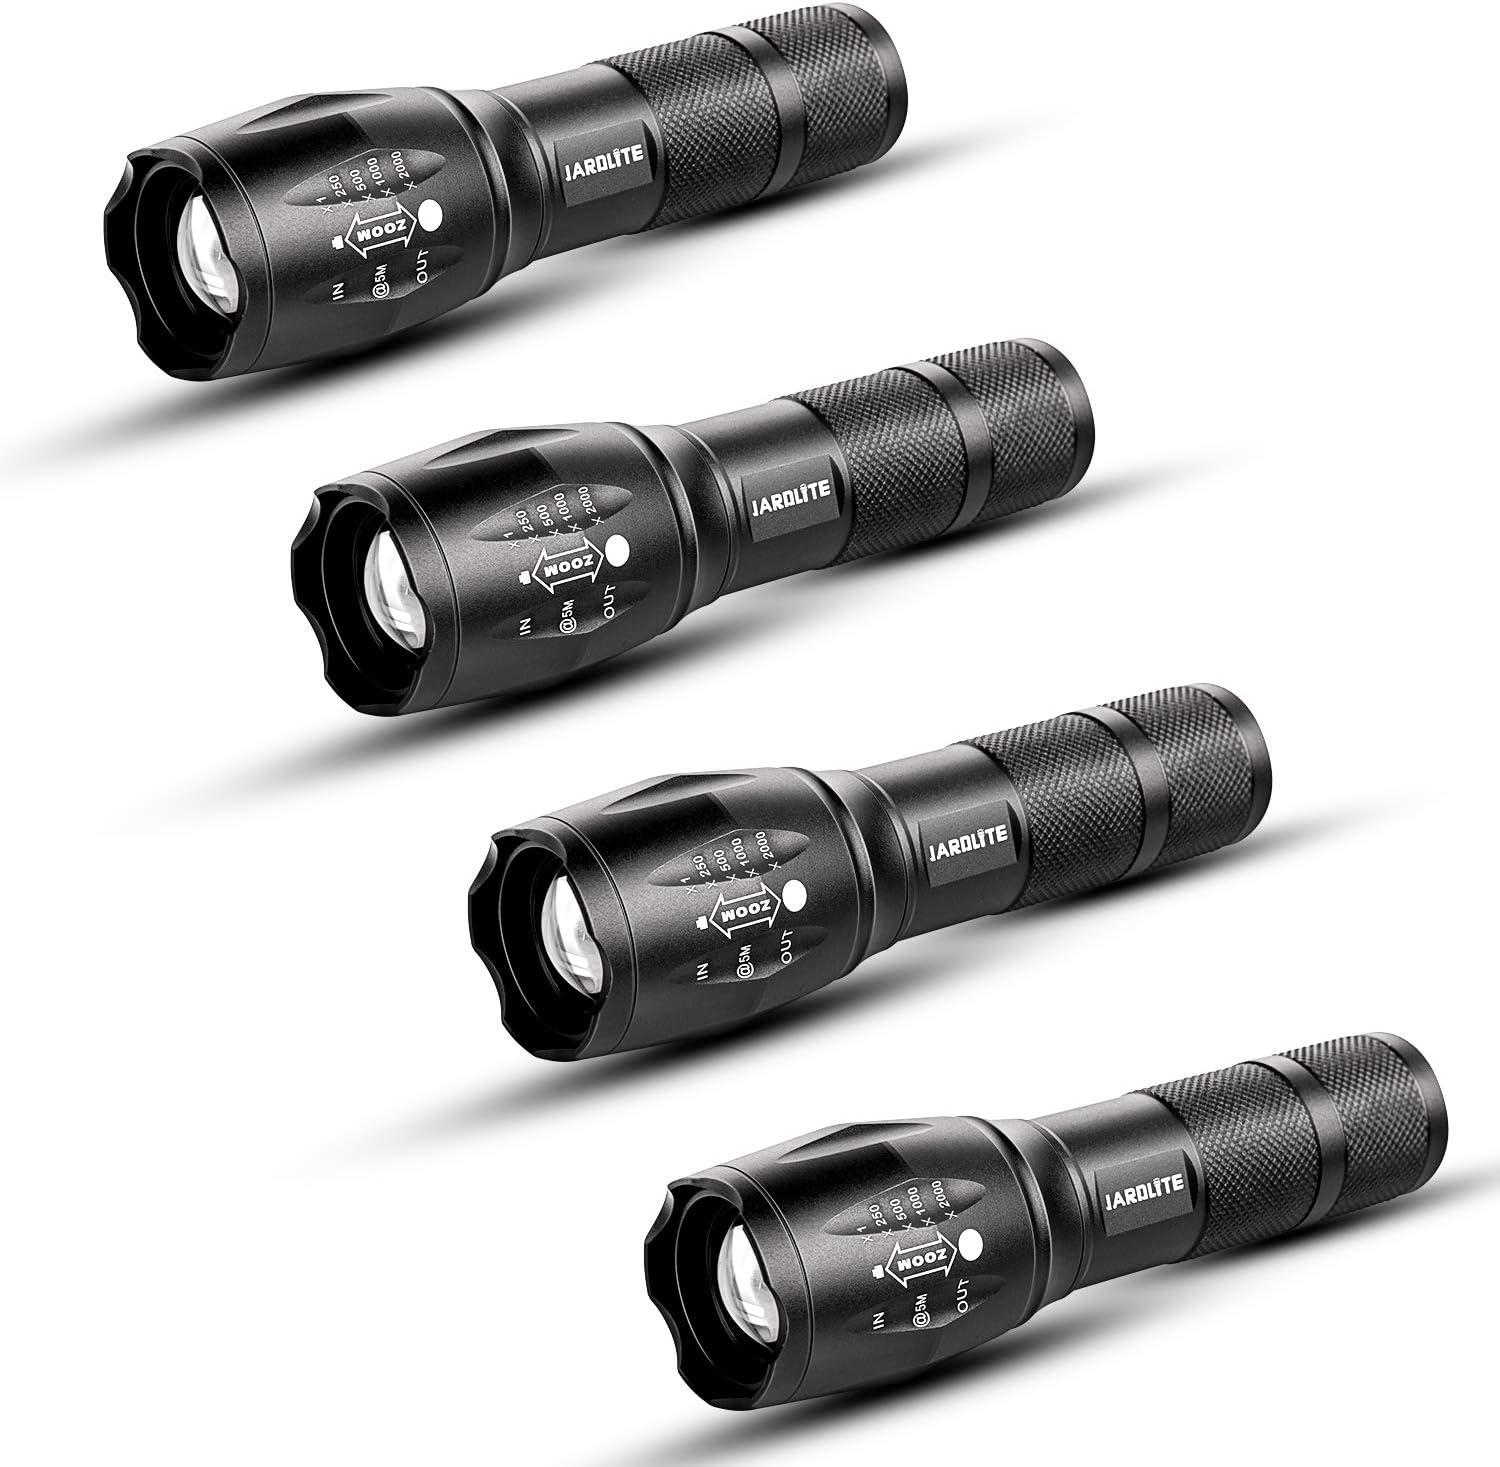 LED Emergency Handheld Flashlight, 4 Pack, Adjustable Focus, Water Resistant with 5 Modes, Best Tactical Torch for Hurricane, Dog Walking, Camping